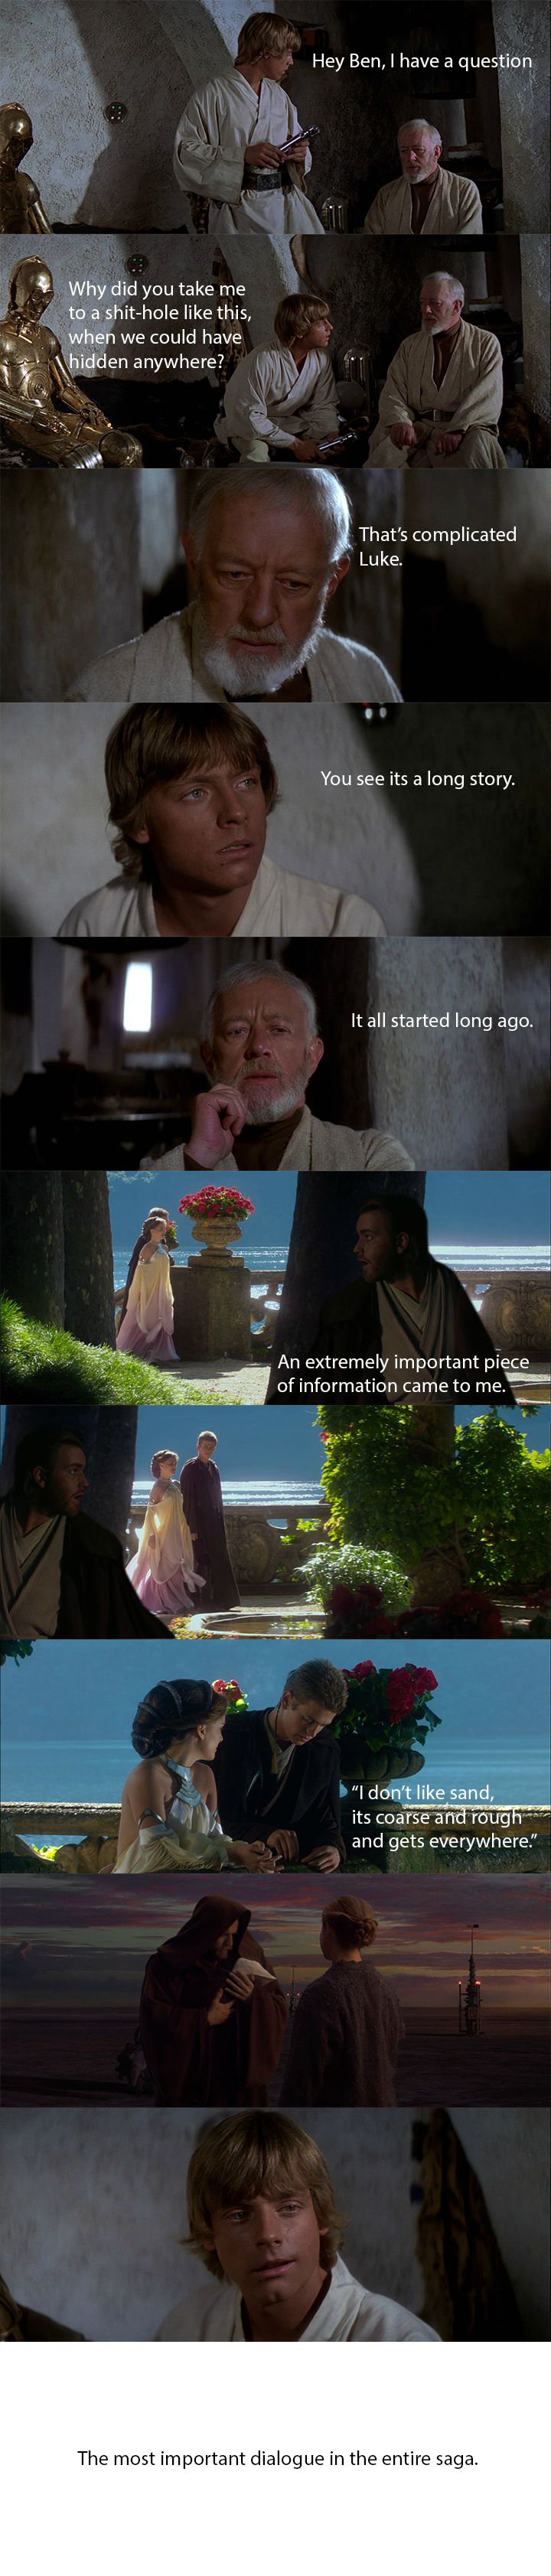 star wars sand meme - Hey Ben, I have a question Why did you take me to a shithole this, when we could have hidden anywhere? That's complicated Luke. You see its a long story. It all started long ago. An extremely important piece of information came to me